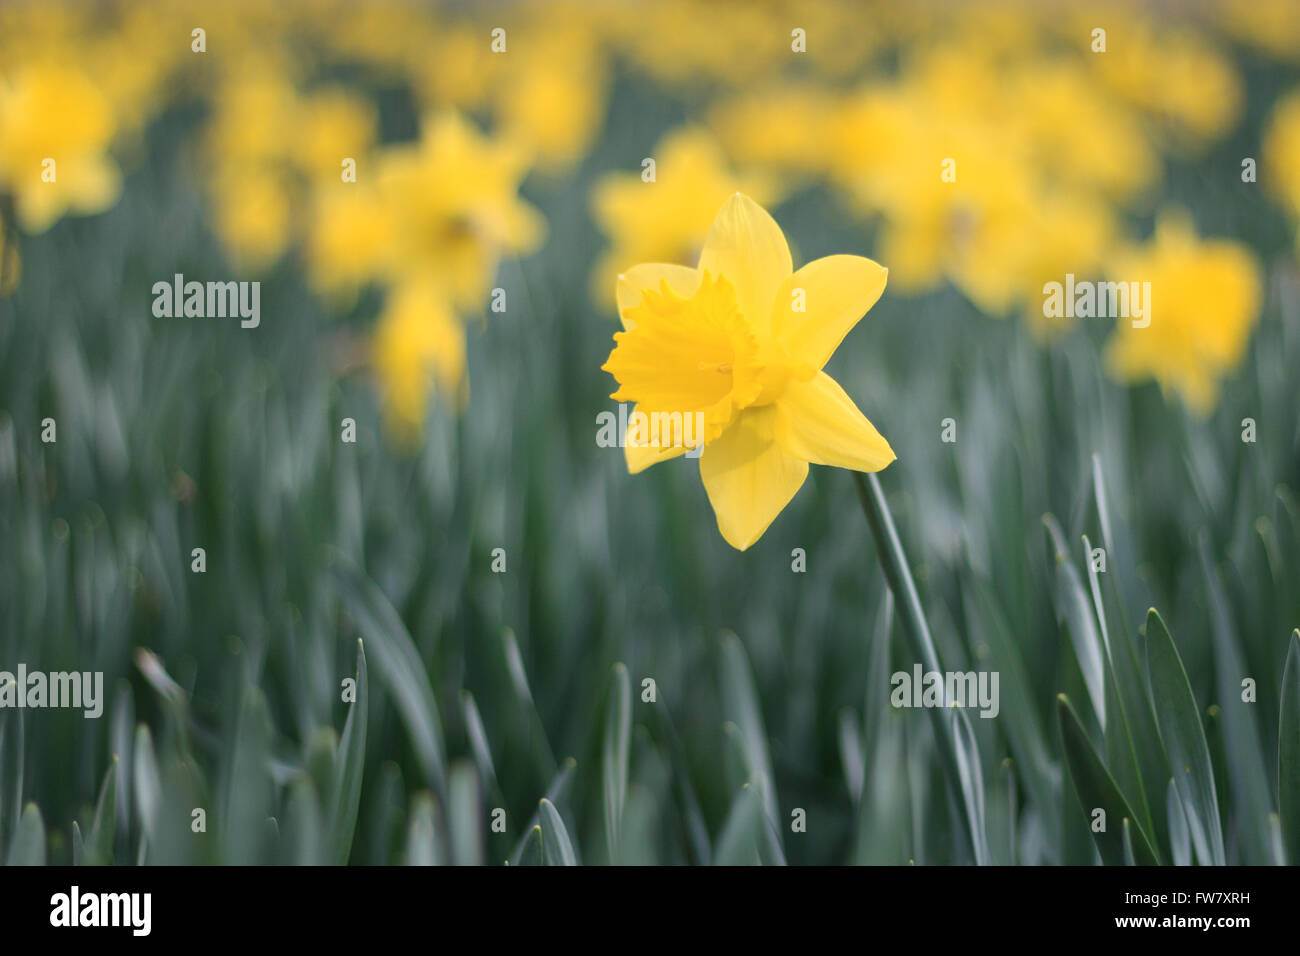 blooming yellow daffodil flowers / narcissus in early spring Stock Photo